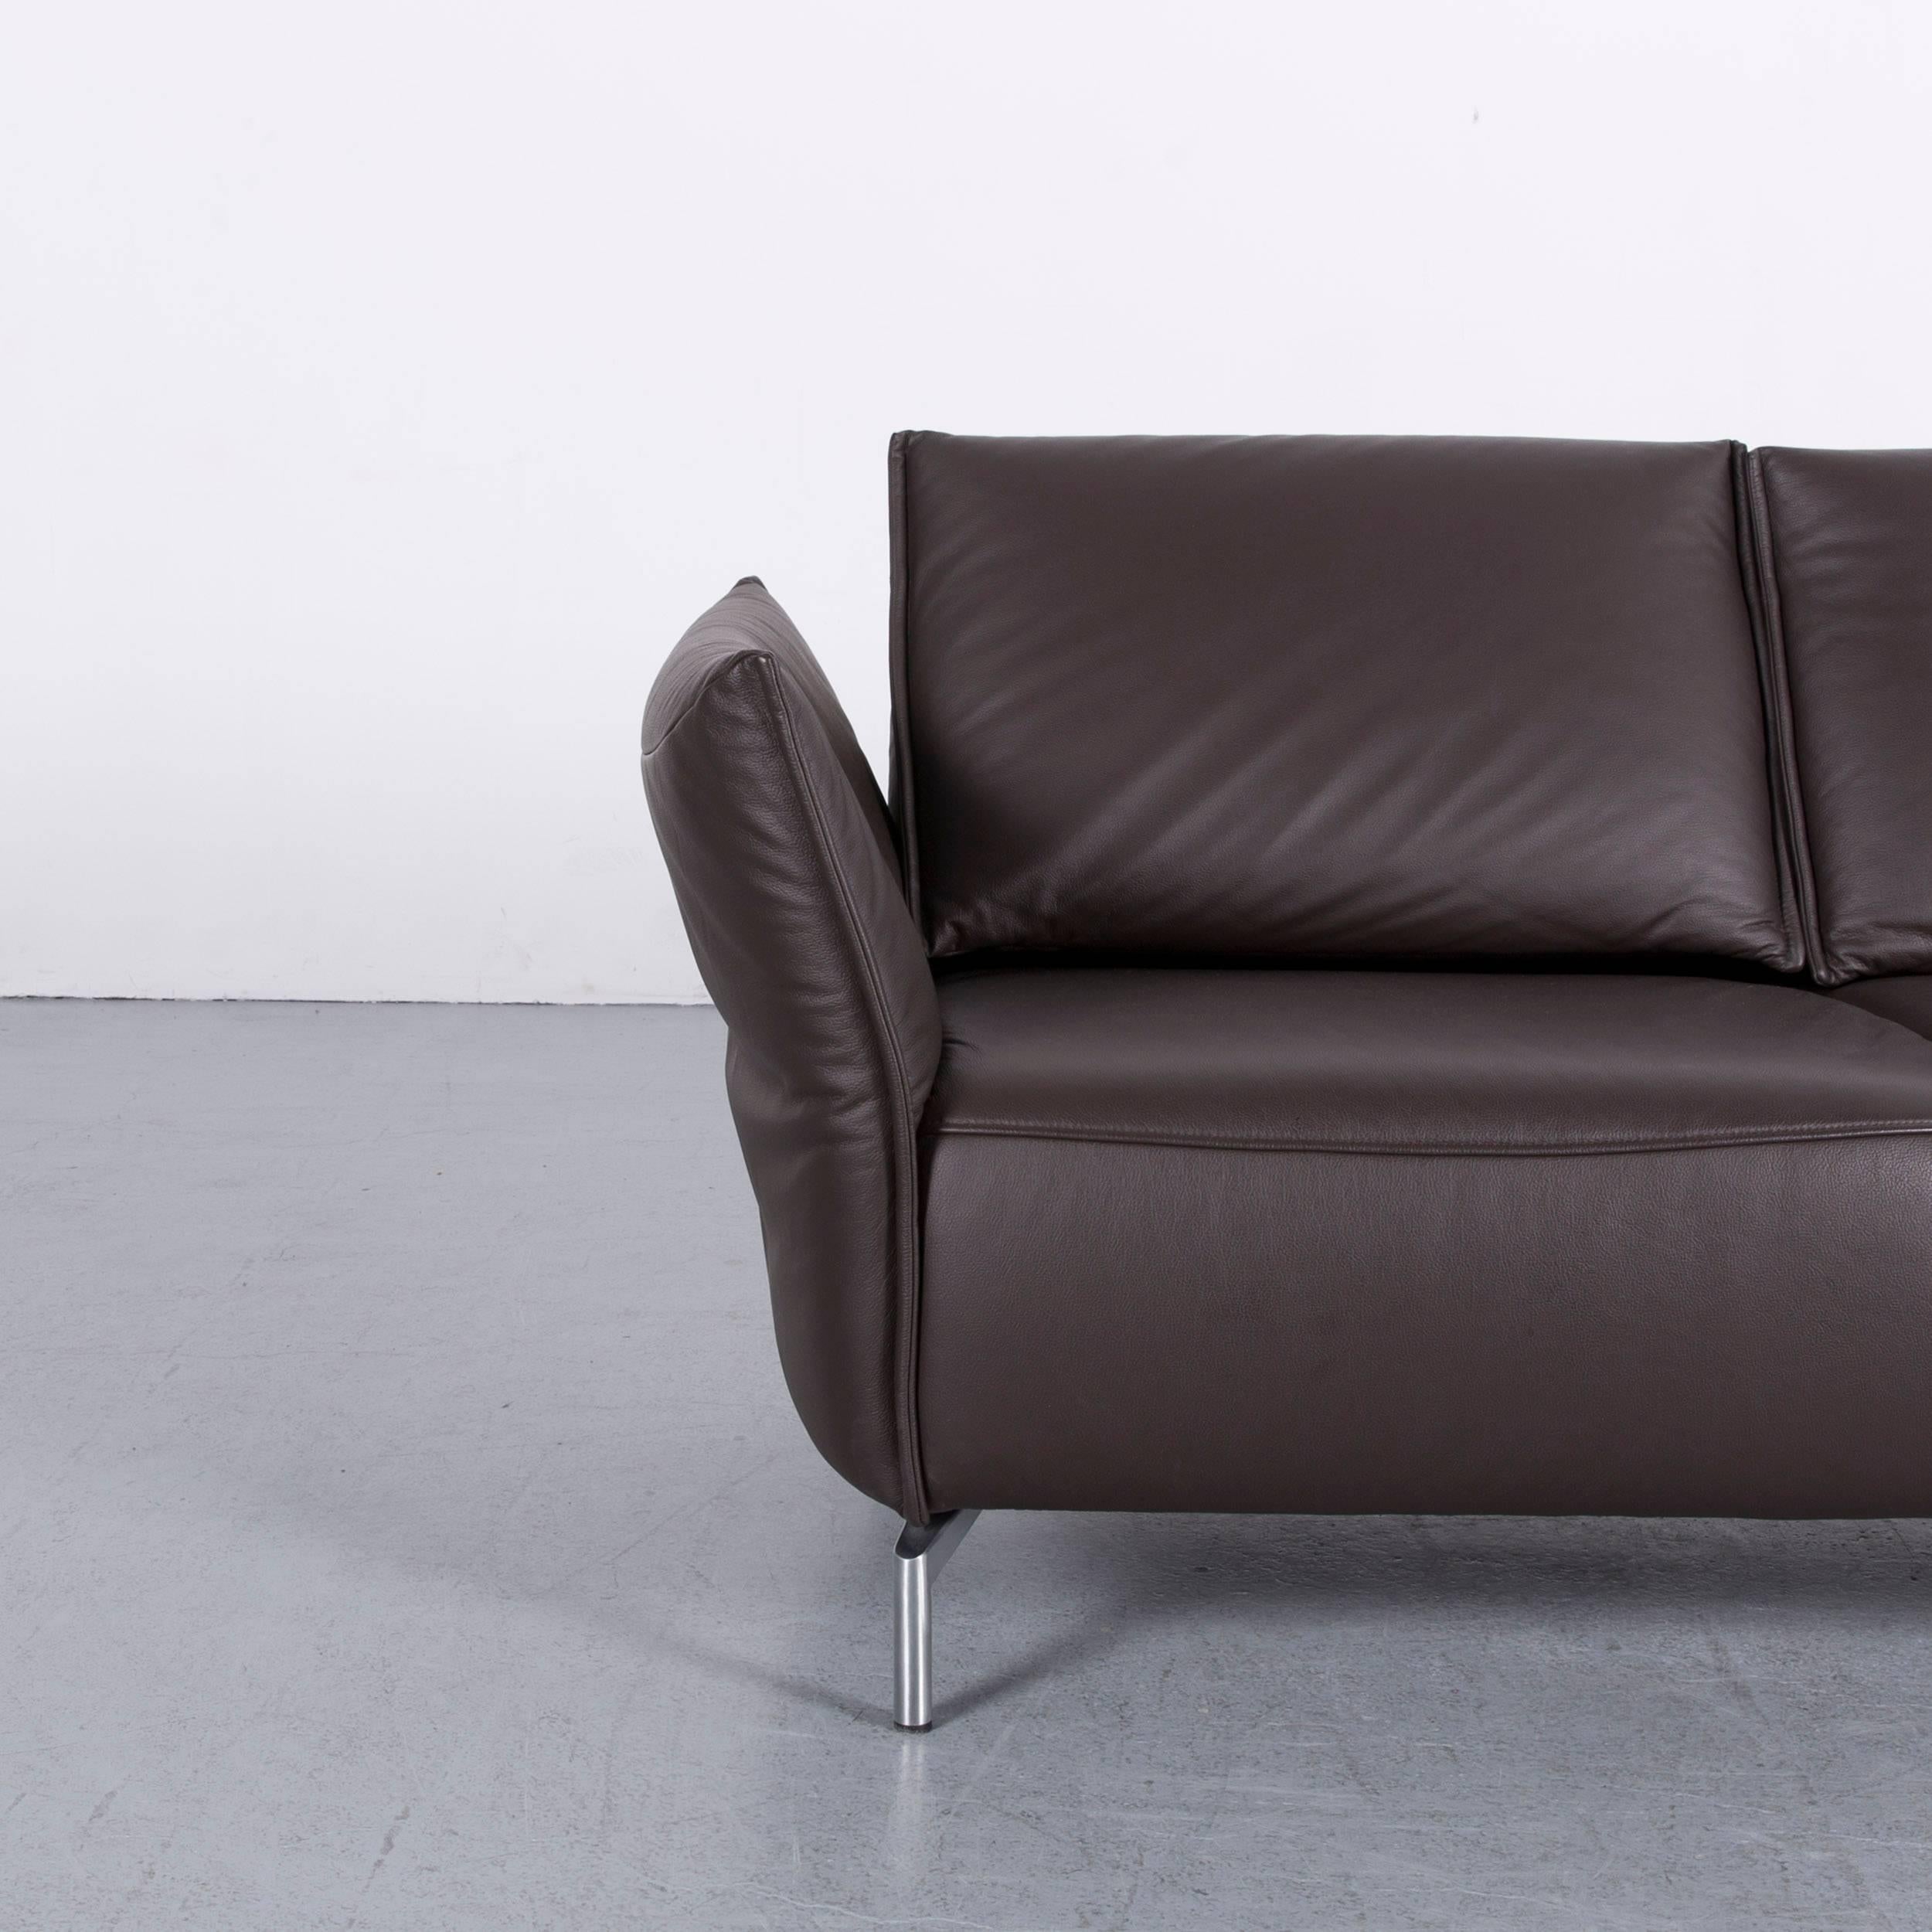 We bring to you an Koinor Vanda two-seat sofa brown leather function.































